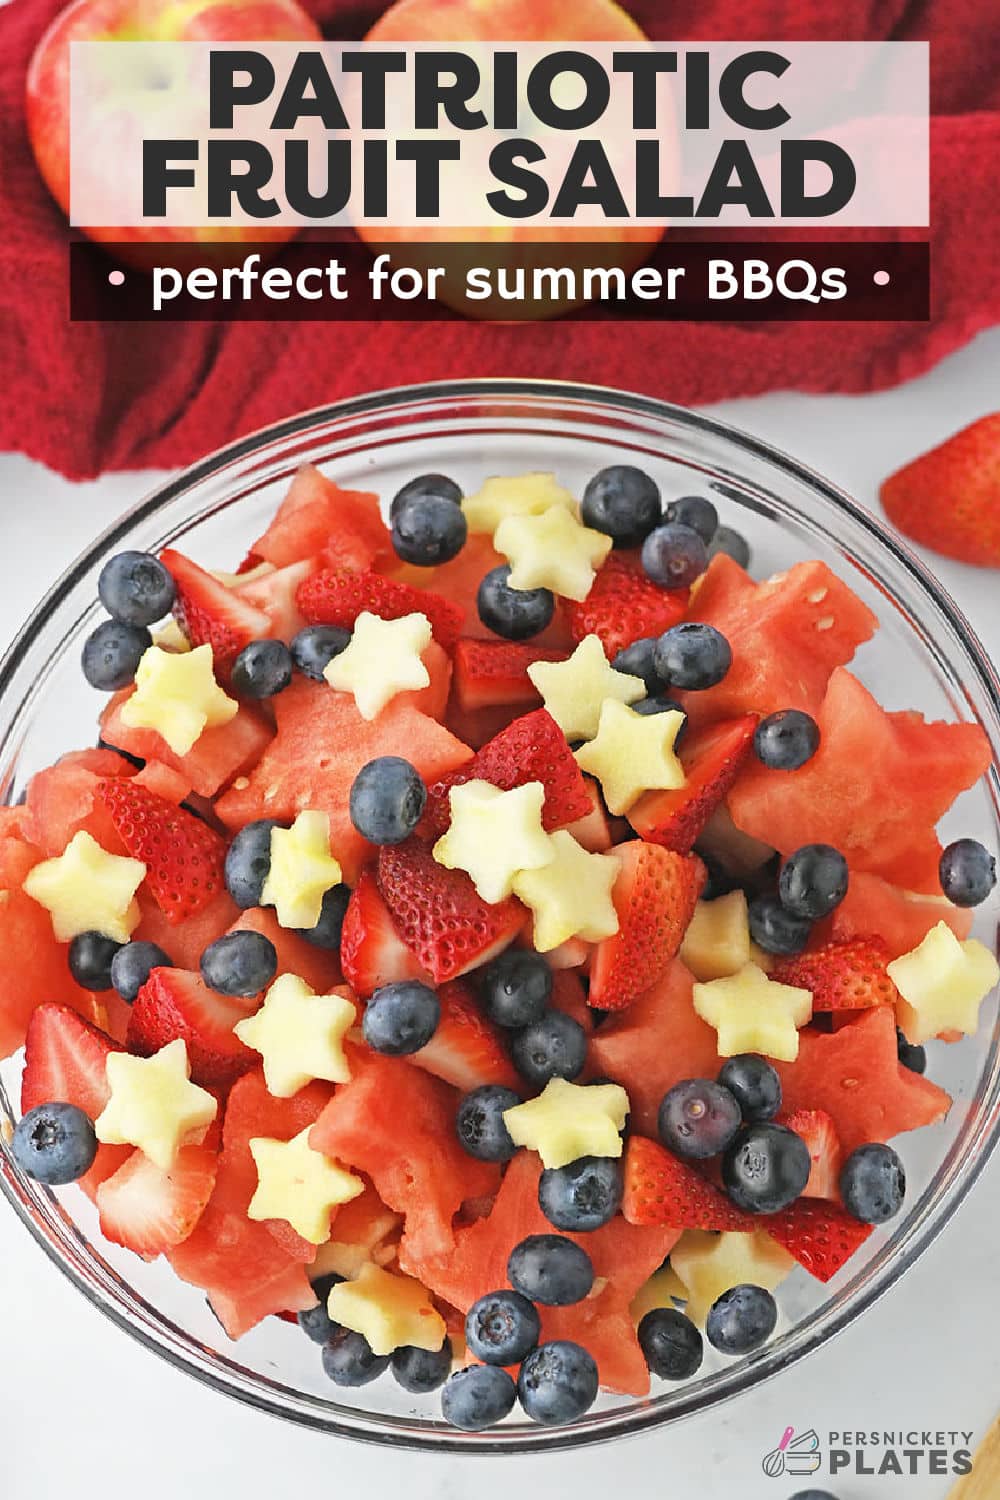 This 4th of July fruit salad is a beautiful, refreshing, and delicious summertime salad perfect for a fun family picnic, Memorial Day, or Fourth of July celebration. Served cold on a hot summer day, this red white and blue fruit salad is full of sweet, juicy, fresh fruit that your whole family will love! | www.persnicketyplates.com